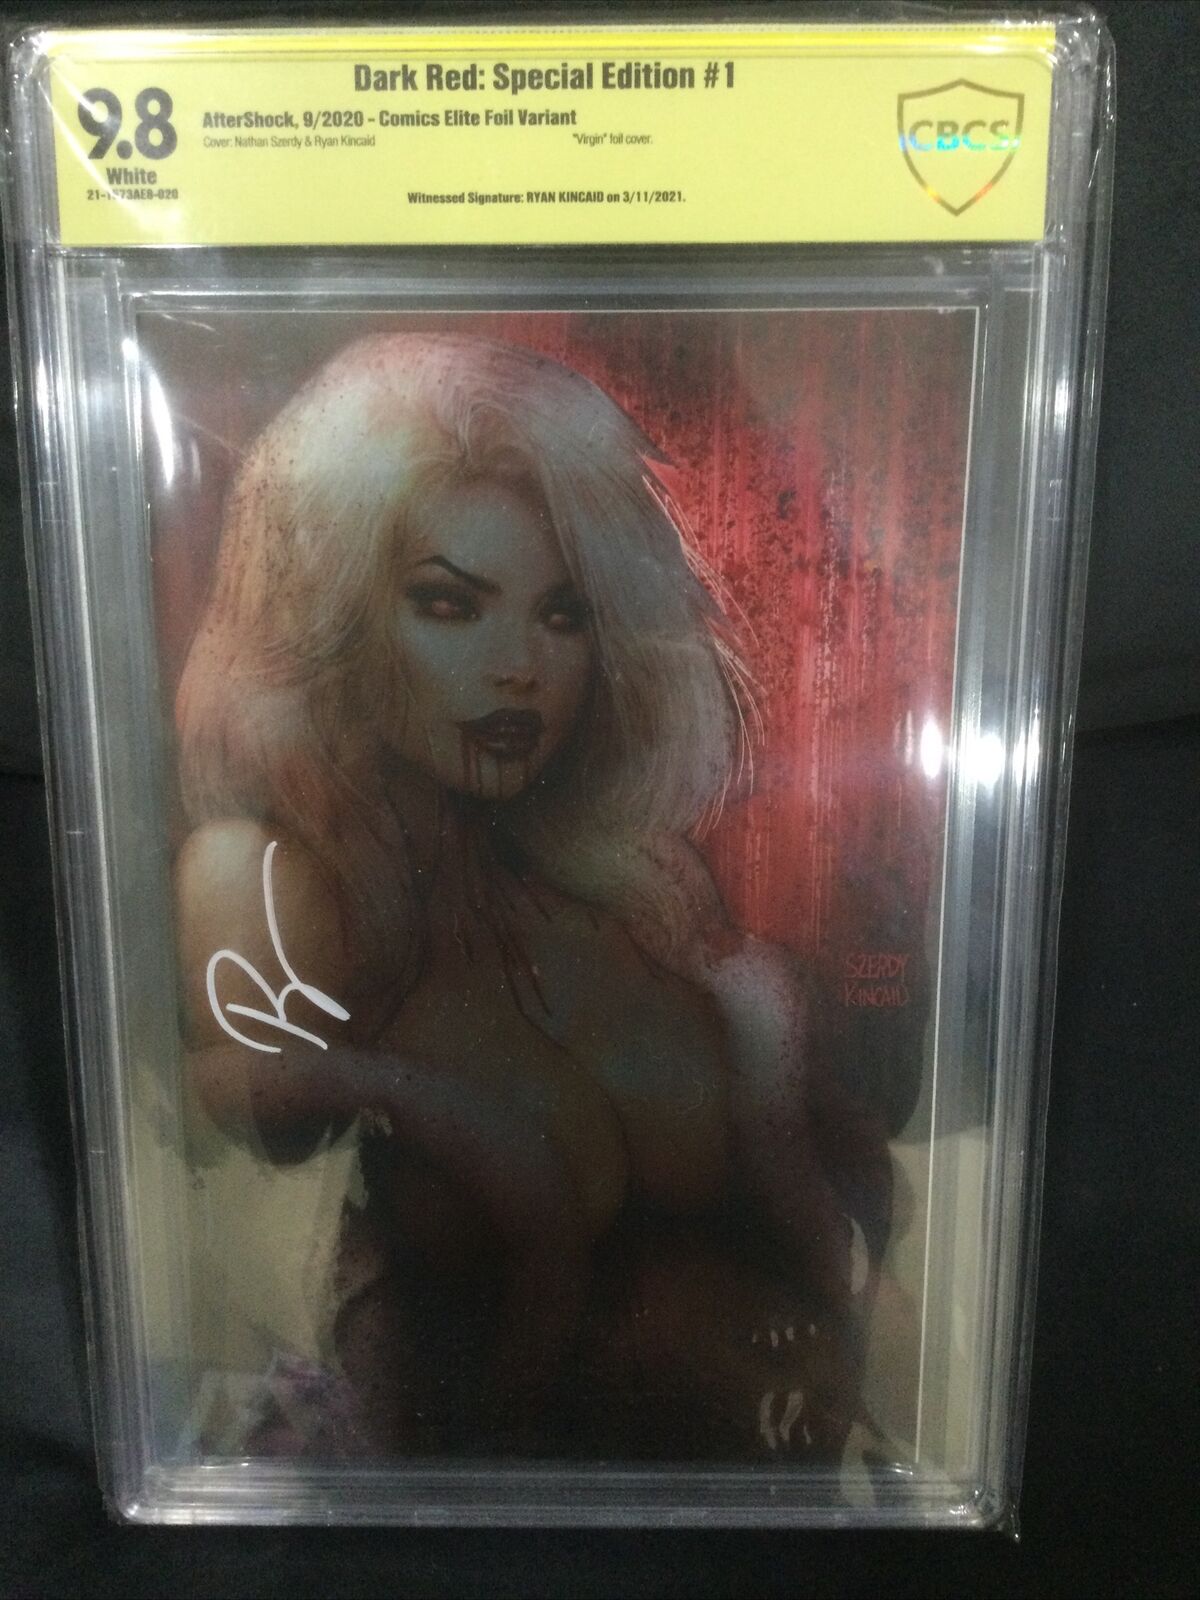 Dark Red Special Edition #1 Comics Elite Foil Variant CBCS 9.8 Signed By Kincaid